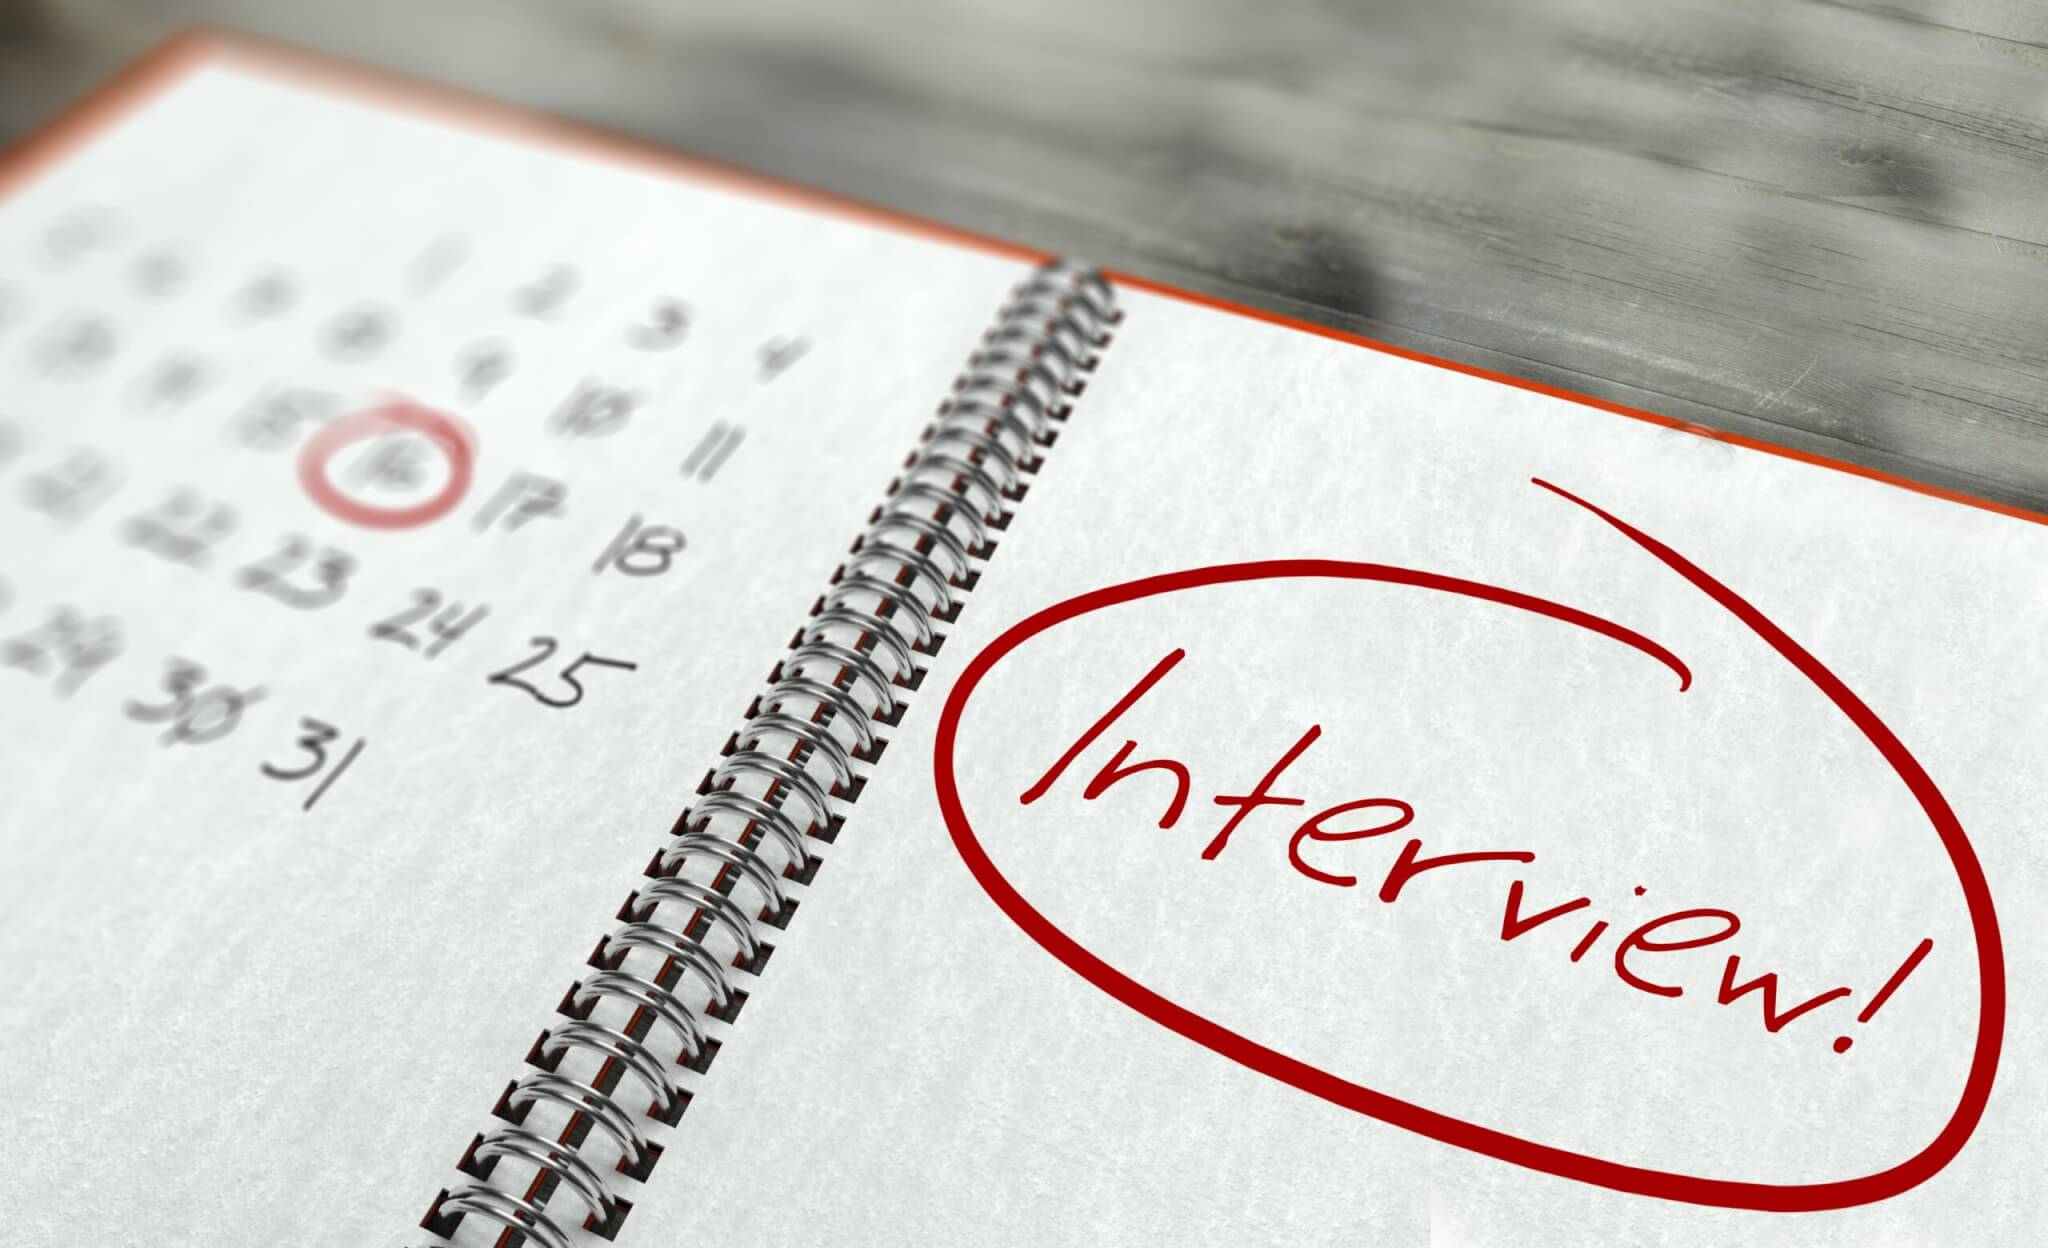 Becoming more efficient when setting interviews